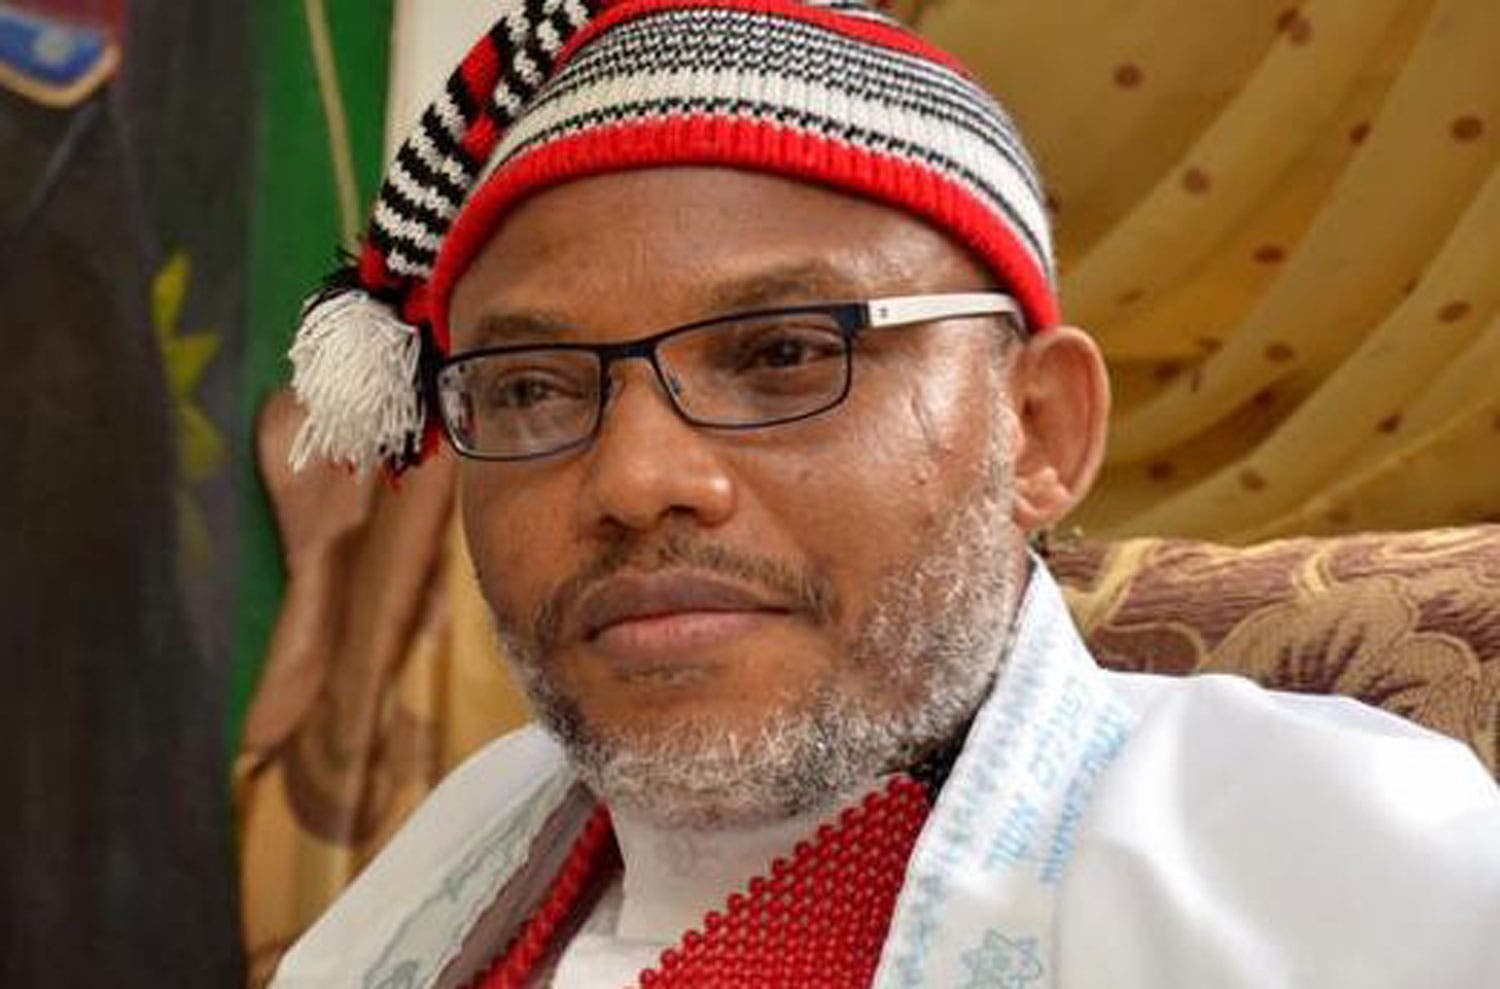 Biafra: Lawyer reveals Nnamdi Kanu’s current condition in DSS detention